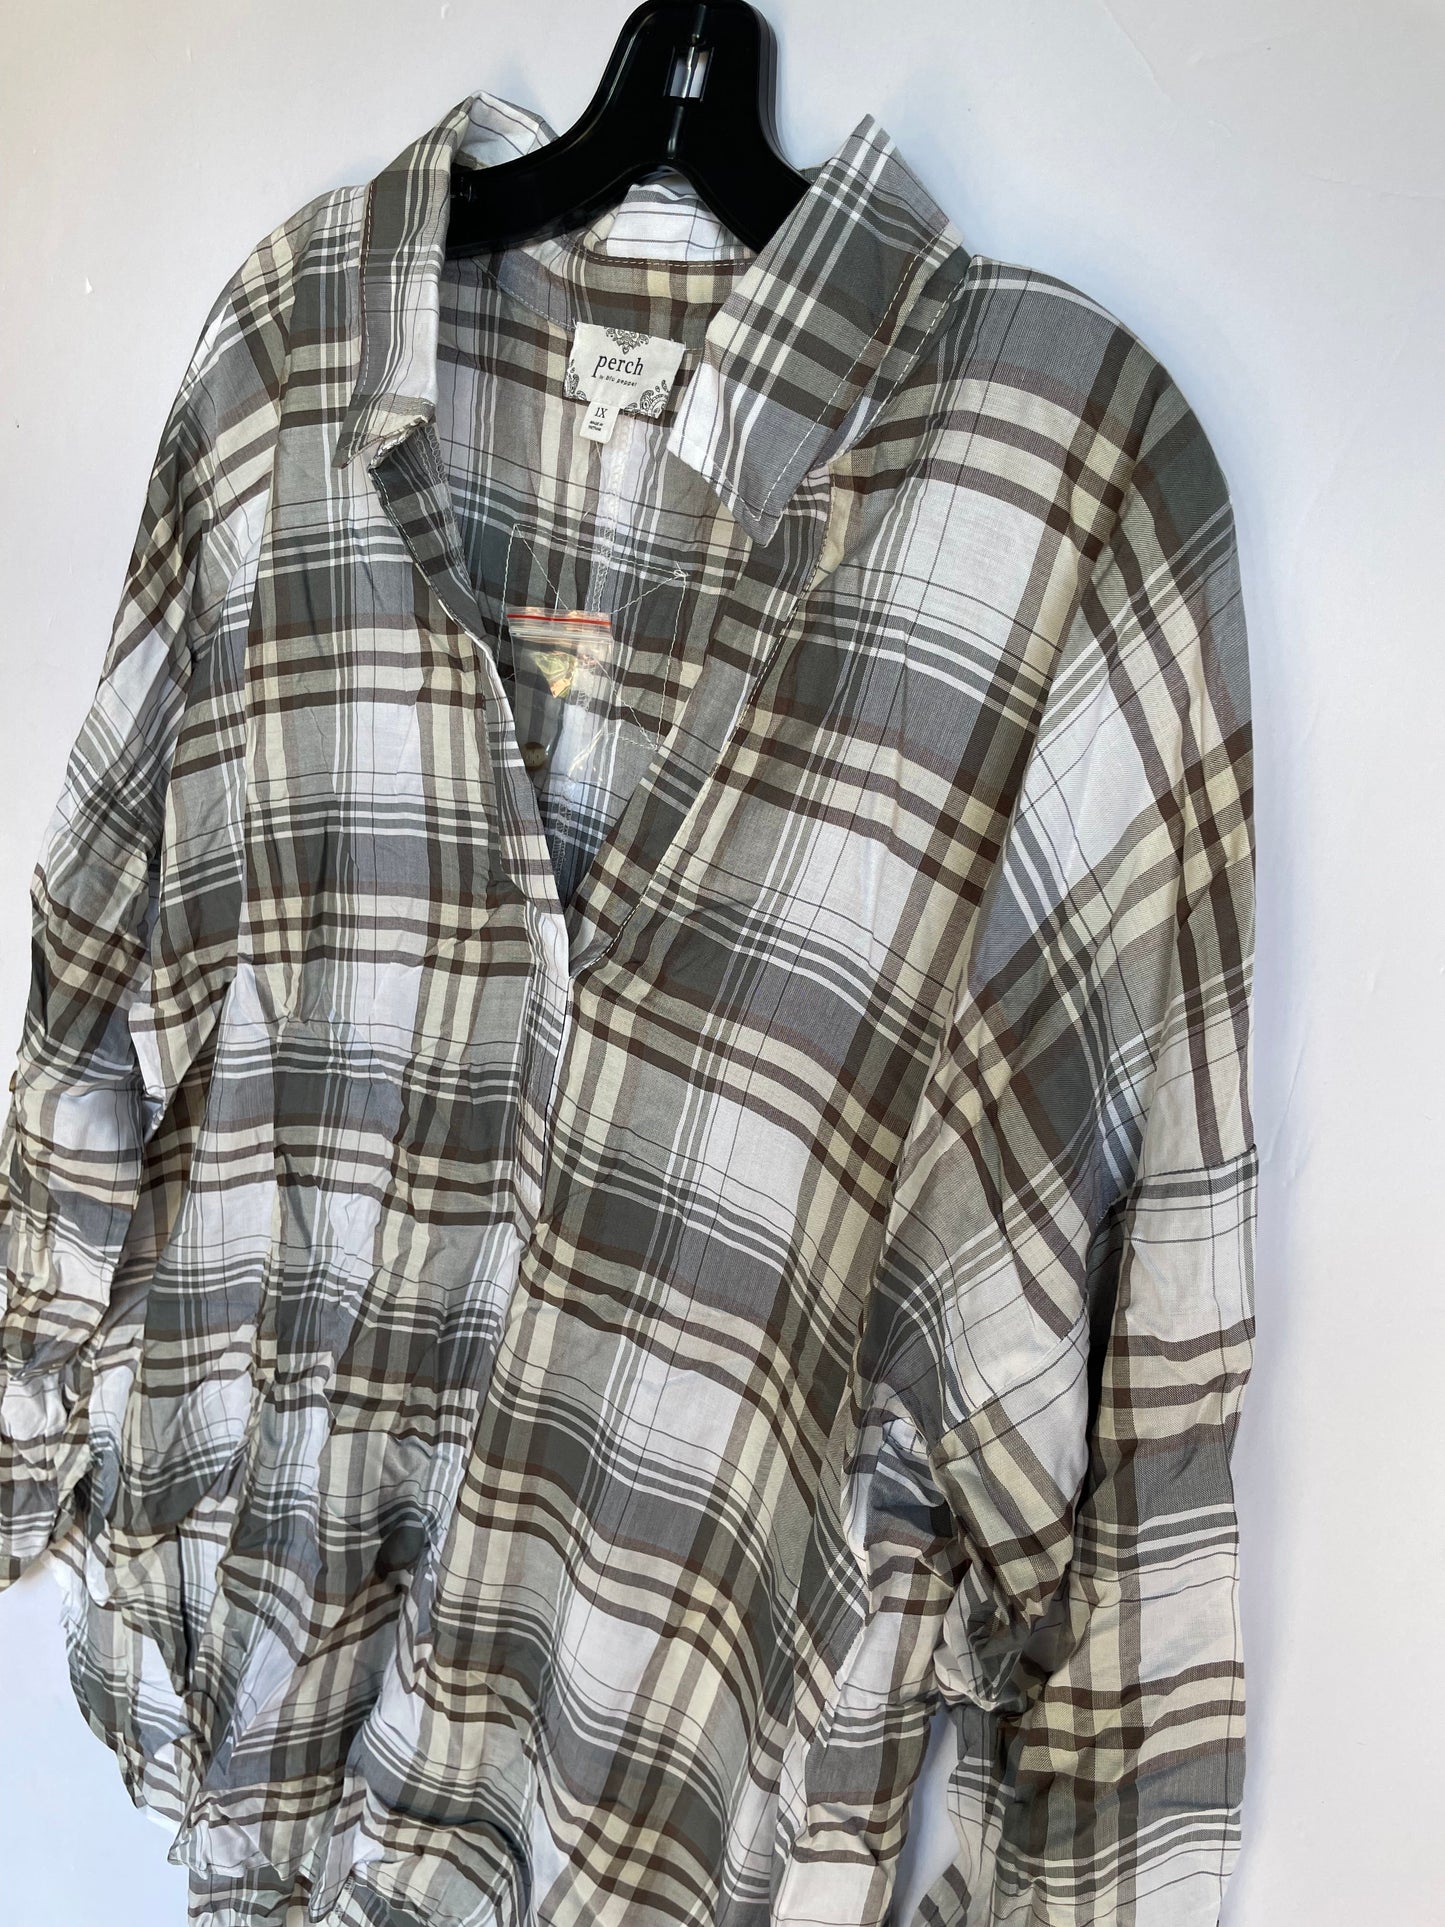 Plaid Pattern Top Long Sleeve Cme, Size 2x